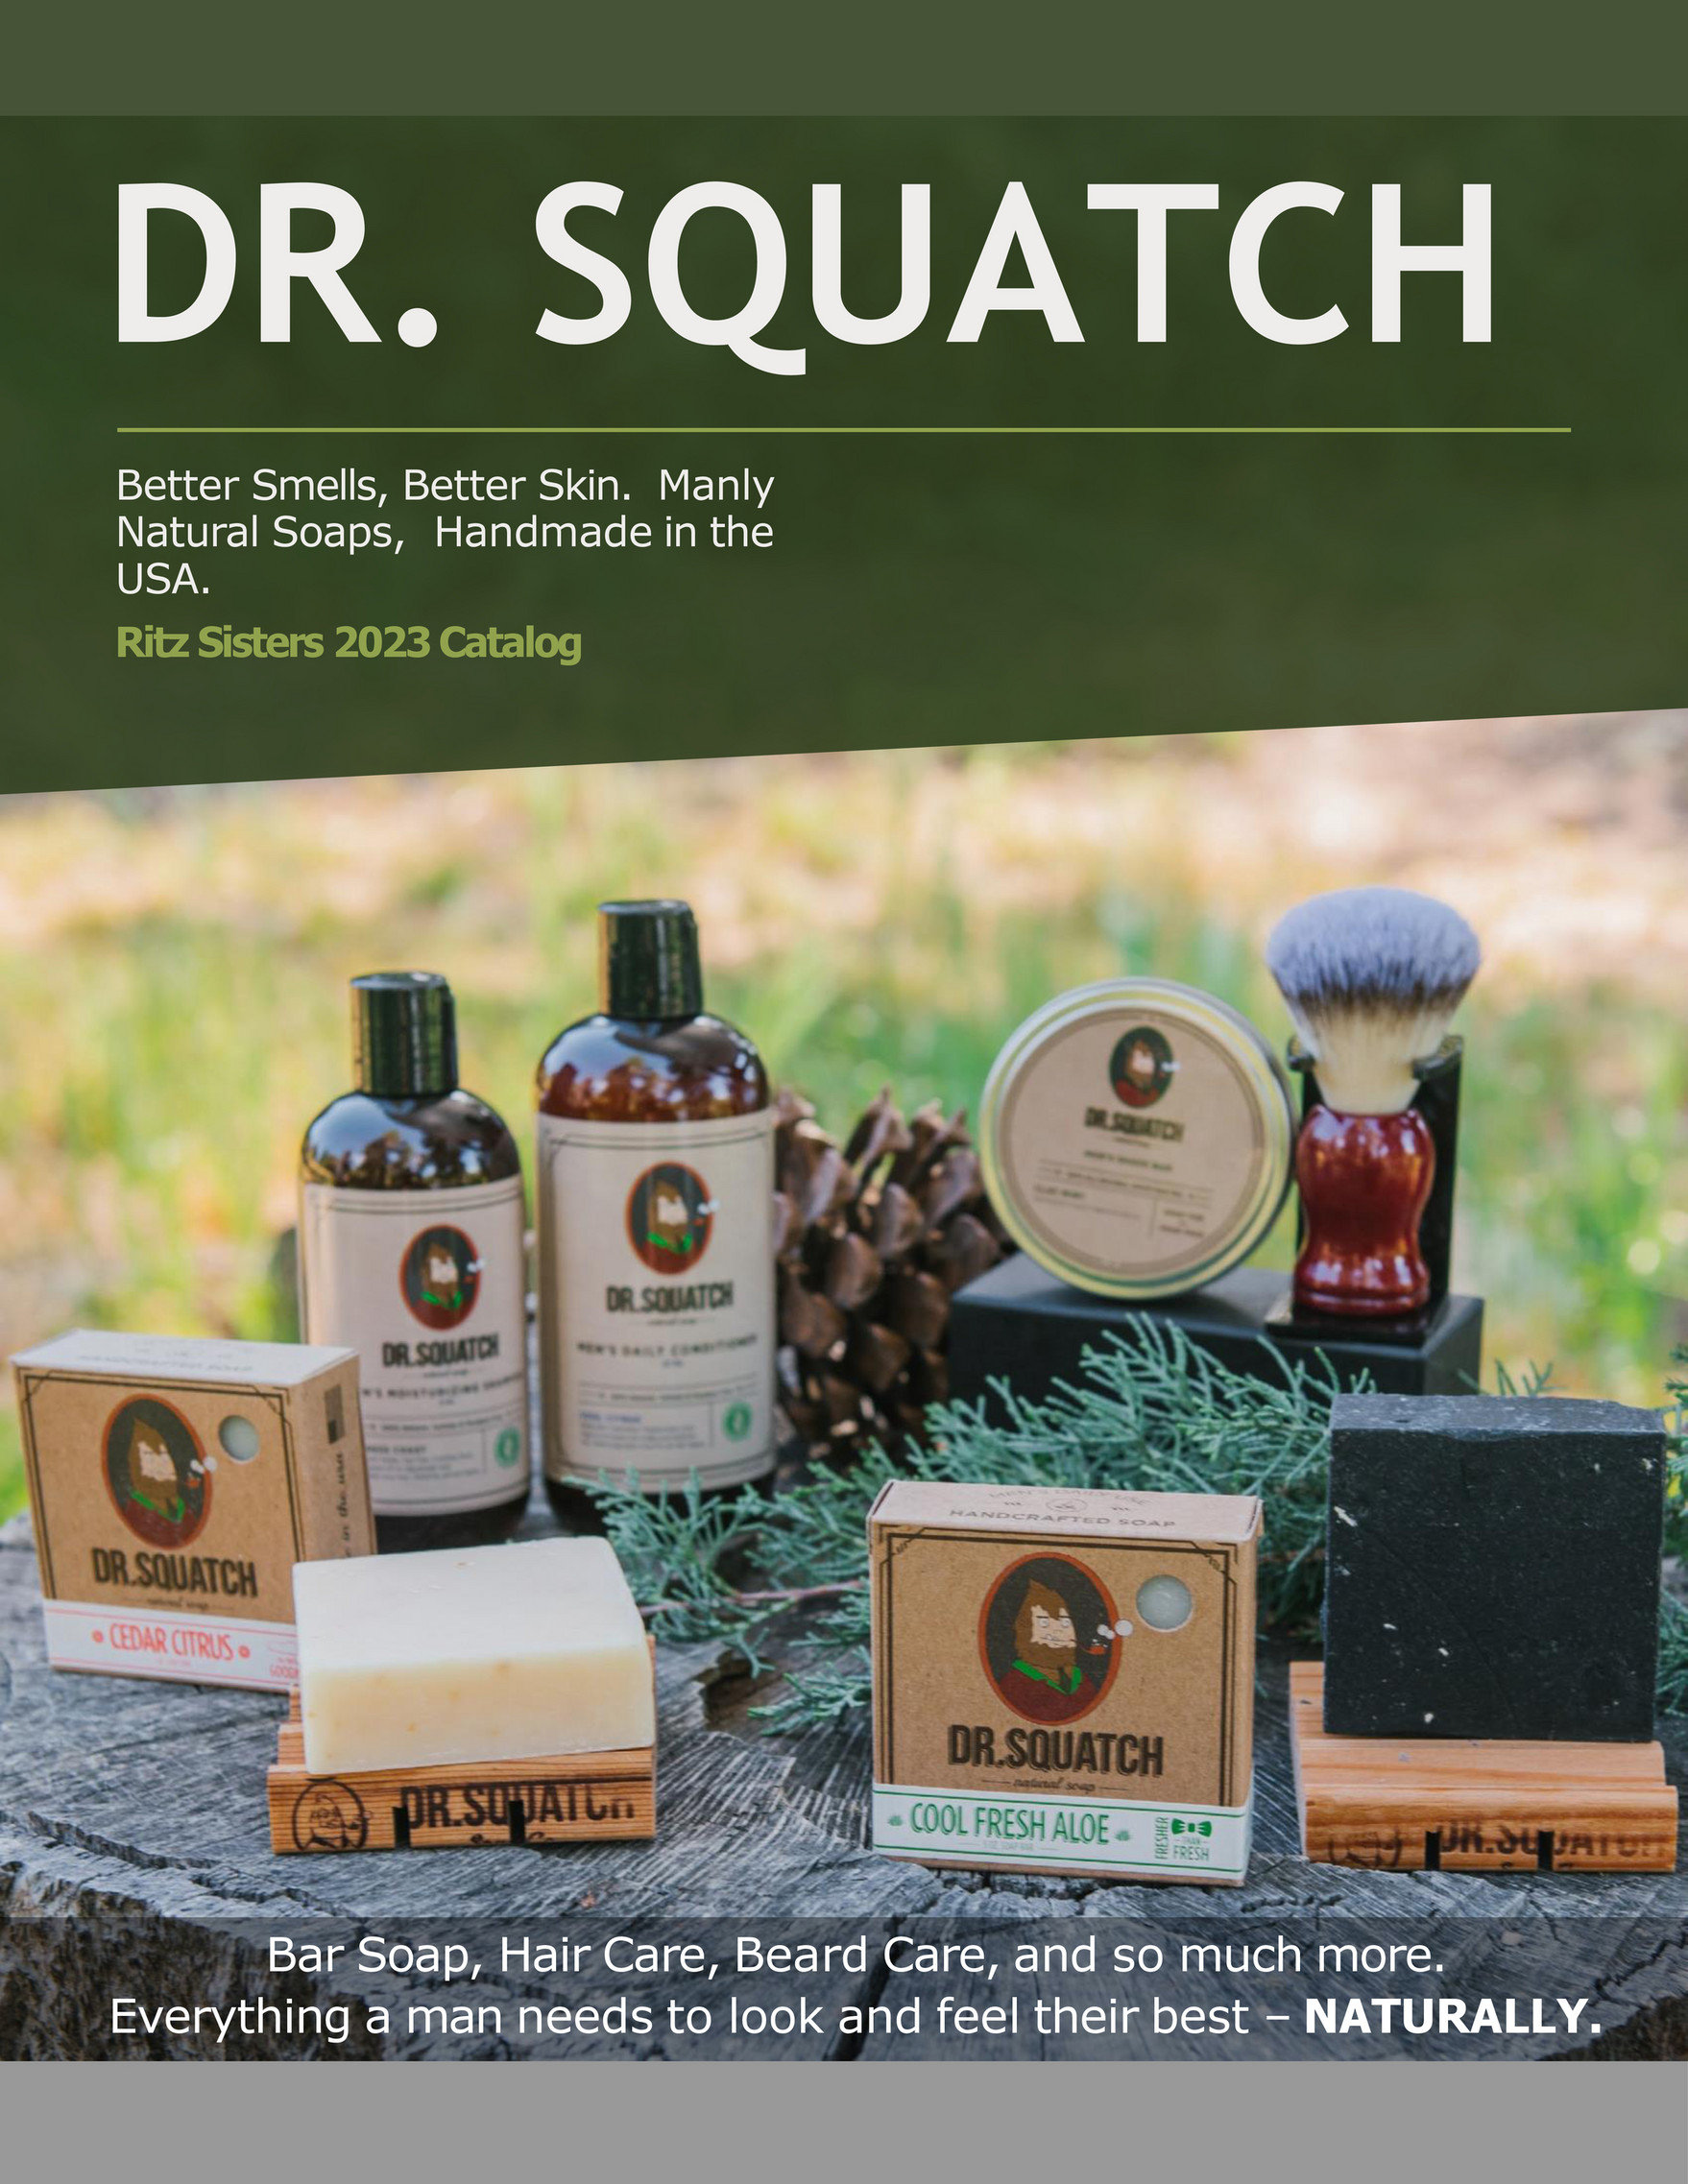 Dr. Squatch - After much demand from the Squatch Nation, your